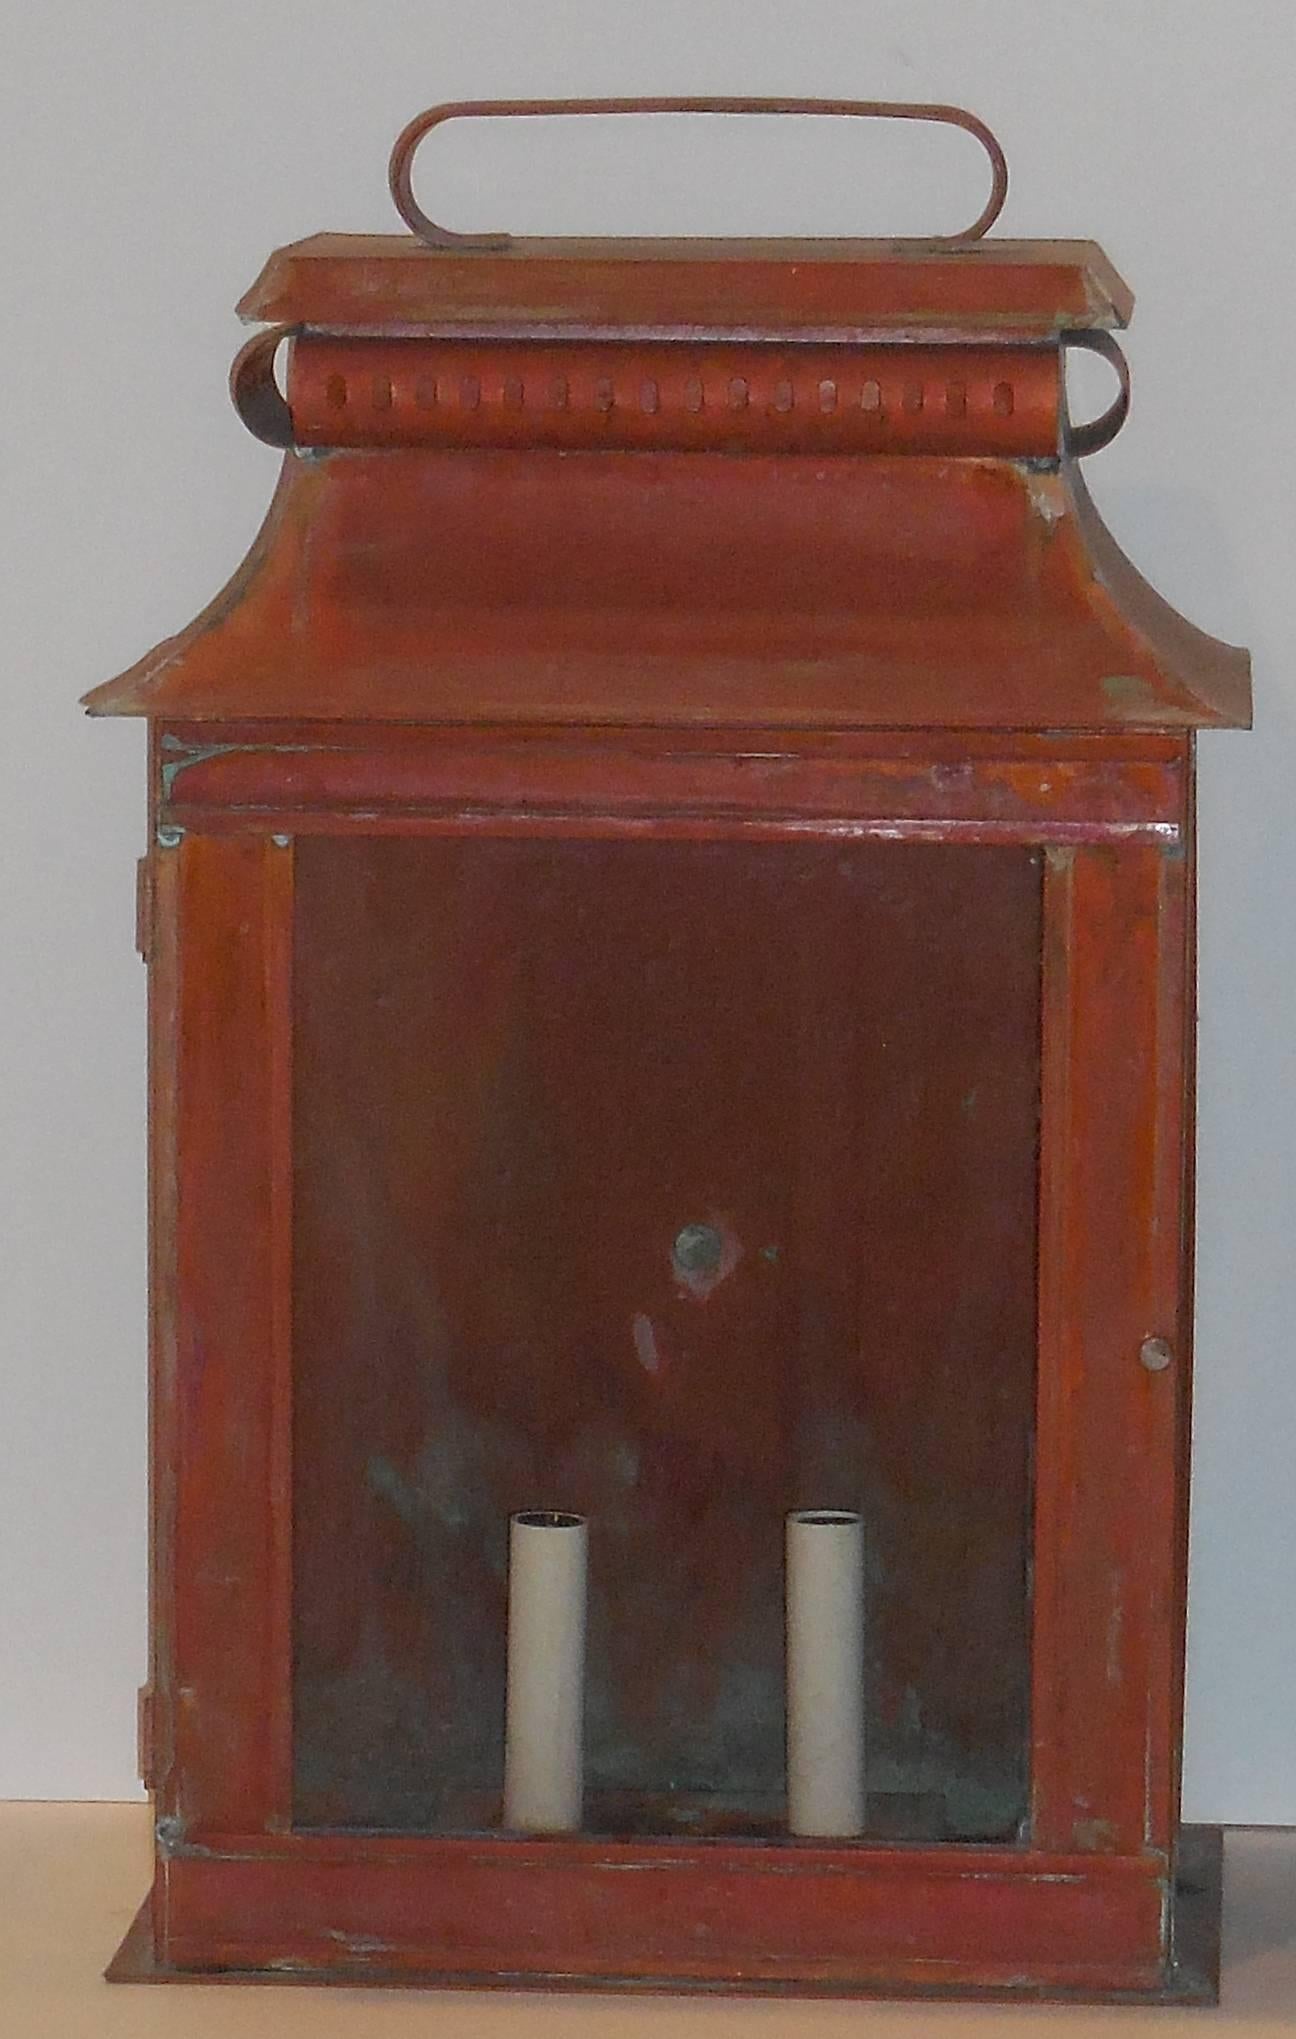 Pair of large and impressive wall lantern made of copper, with two 60/watt light on each lantern.
Made in the US.
UL approved, suitable for wet location.
Wired and ready to light.